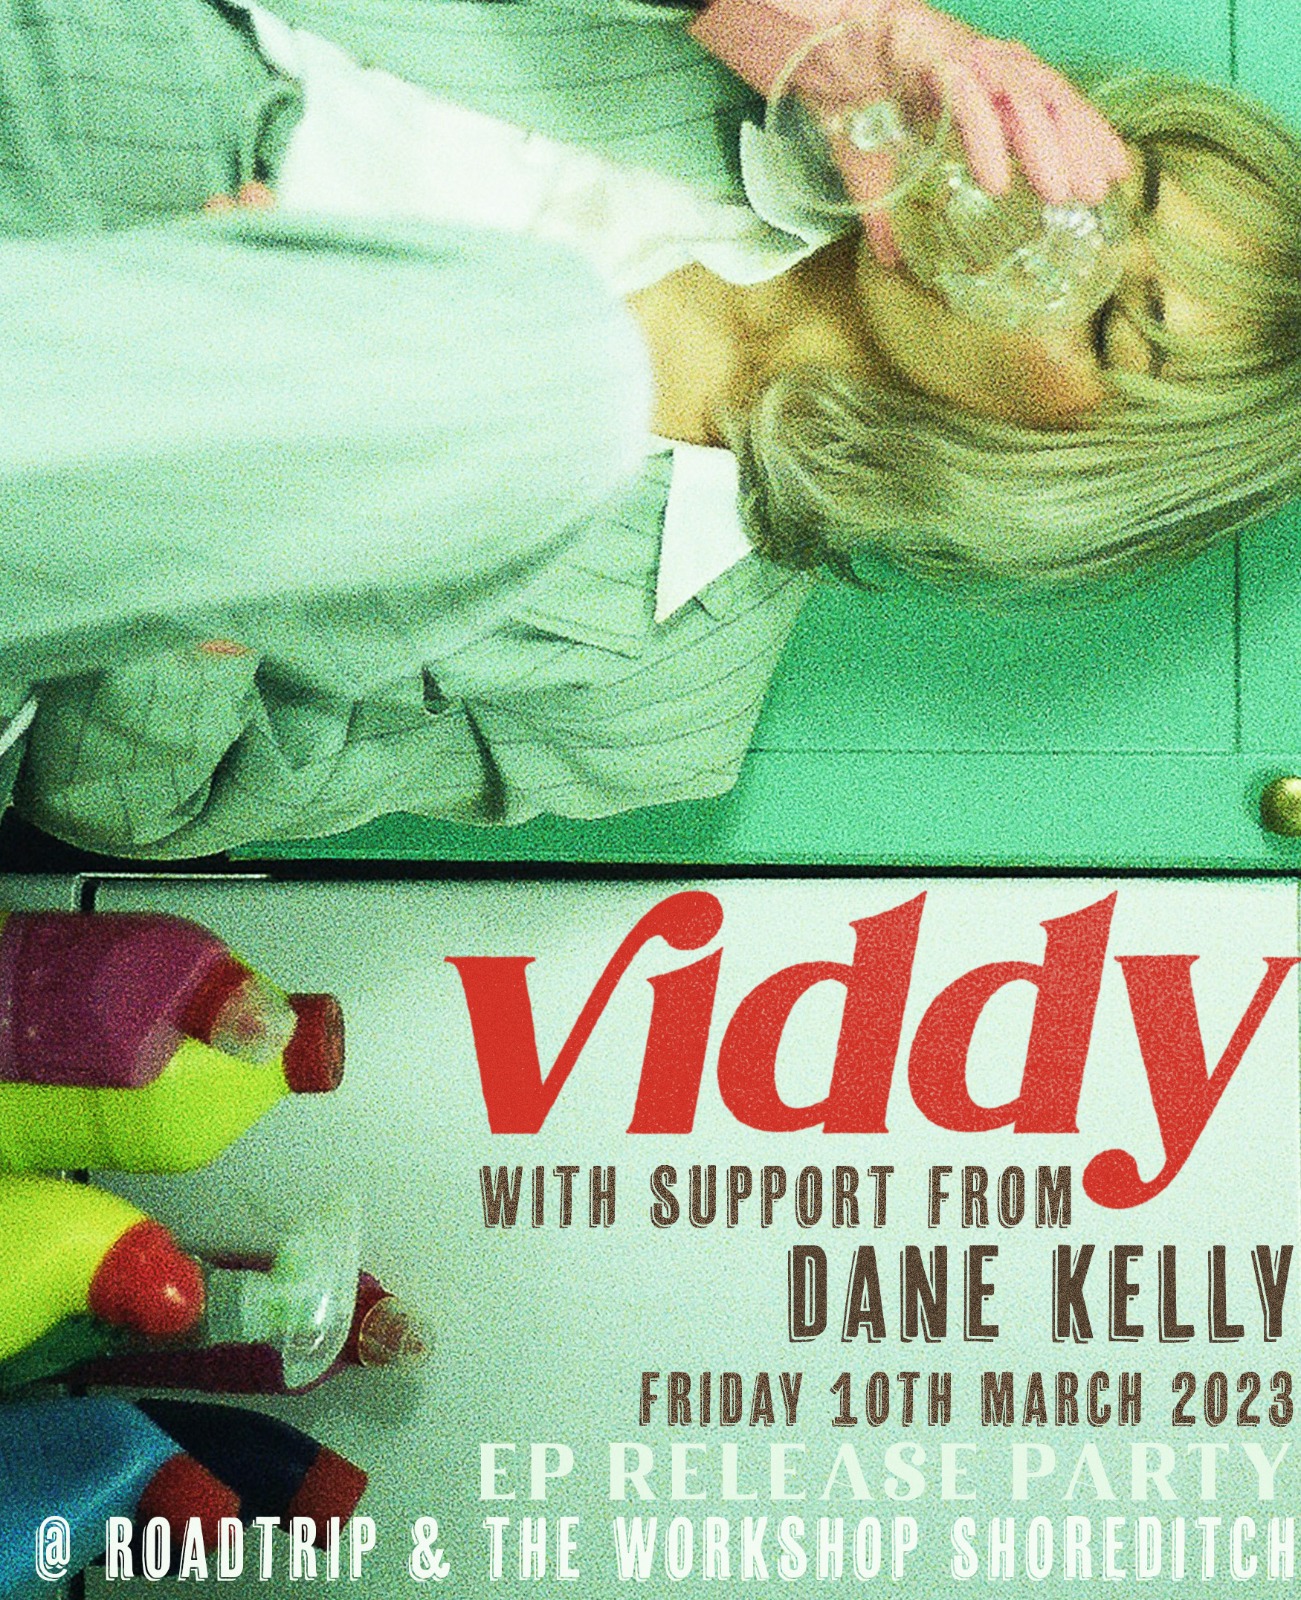 Viddy With Support from Dan Kelly